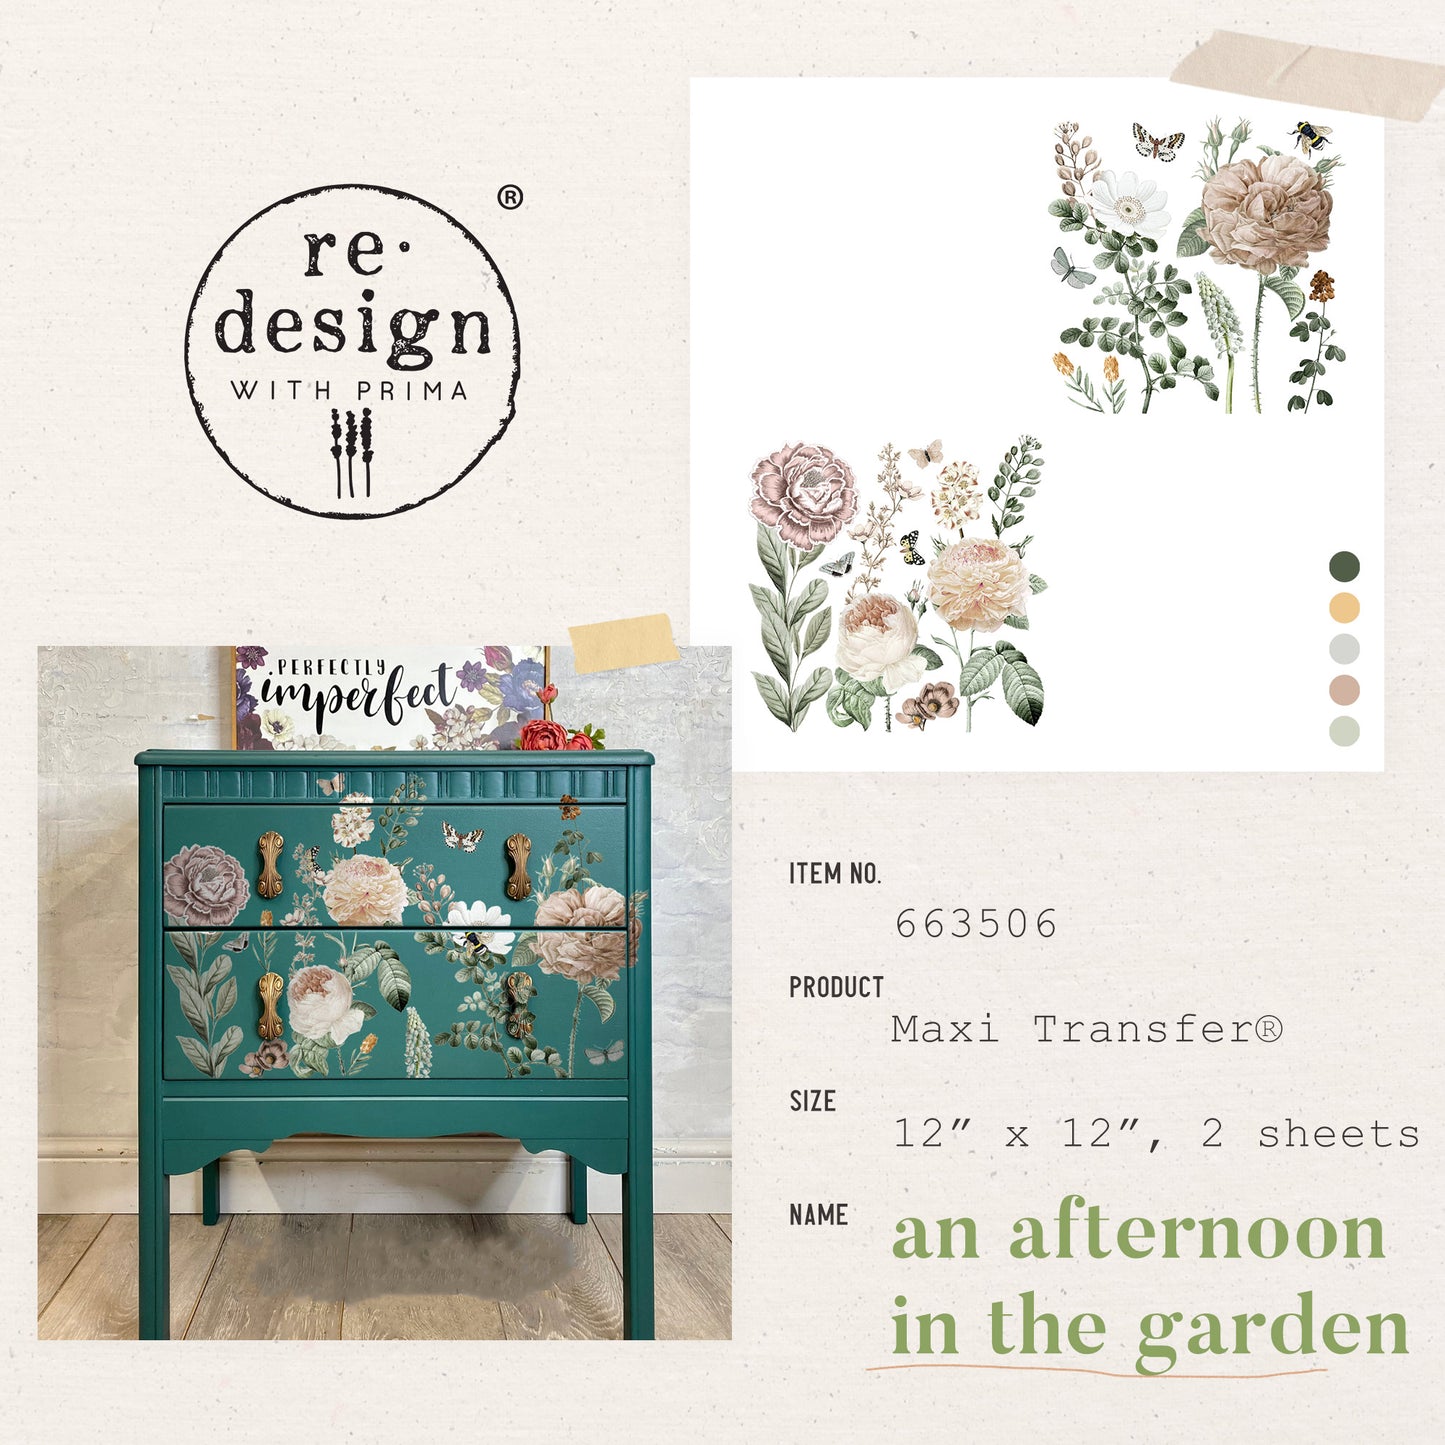 Transferfolien | Redesign Transfer - An Afternoon In The Garden